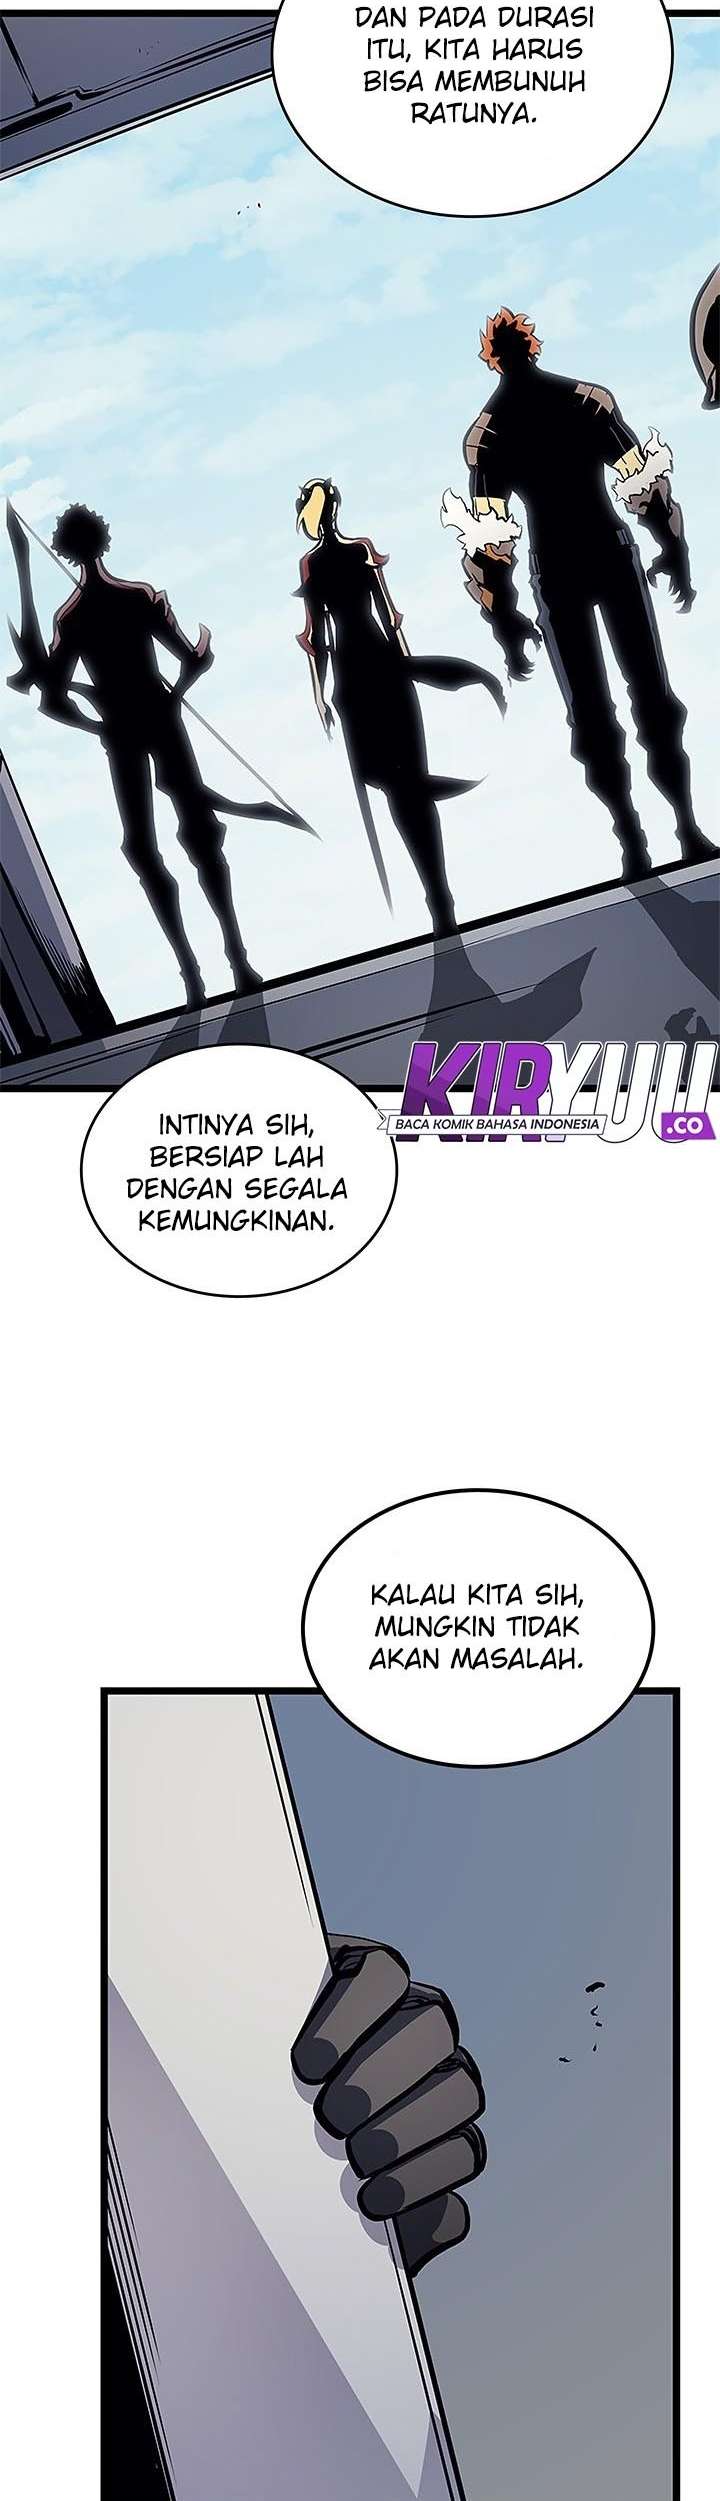 Solo Leveling  Chapter 95